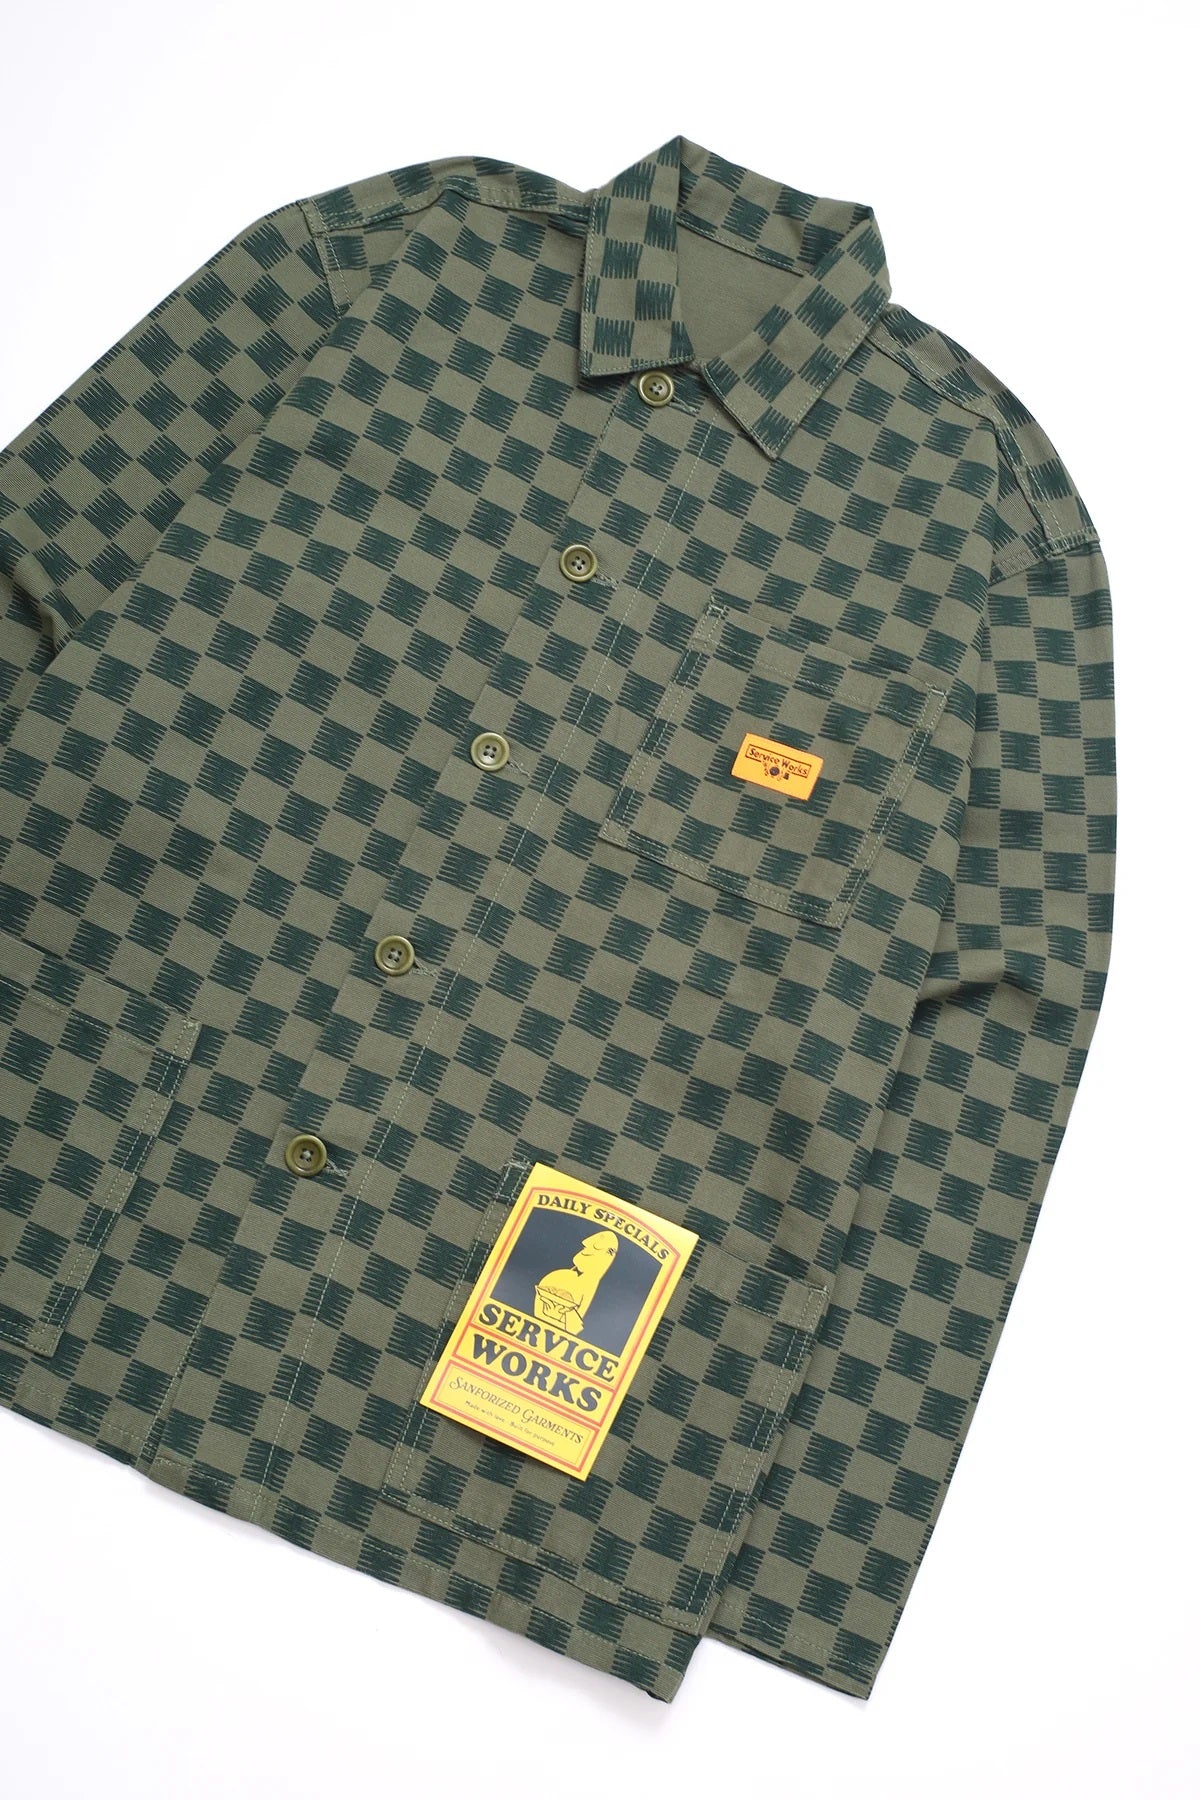 Service Works Canvas Coverall Jacket Groen Heren